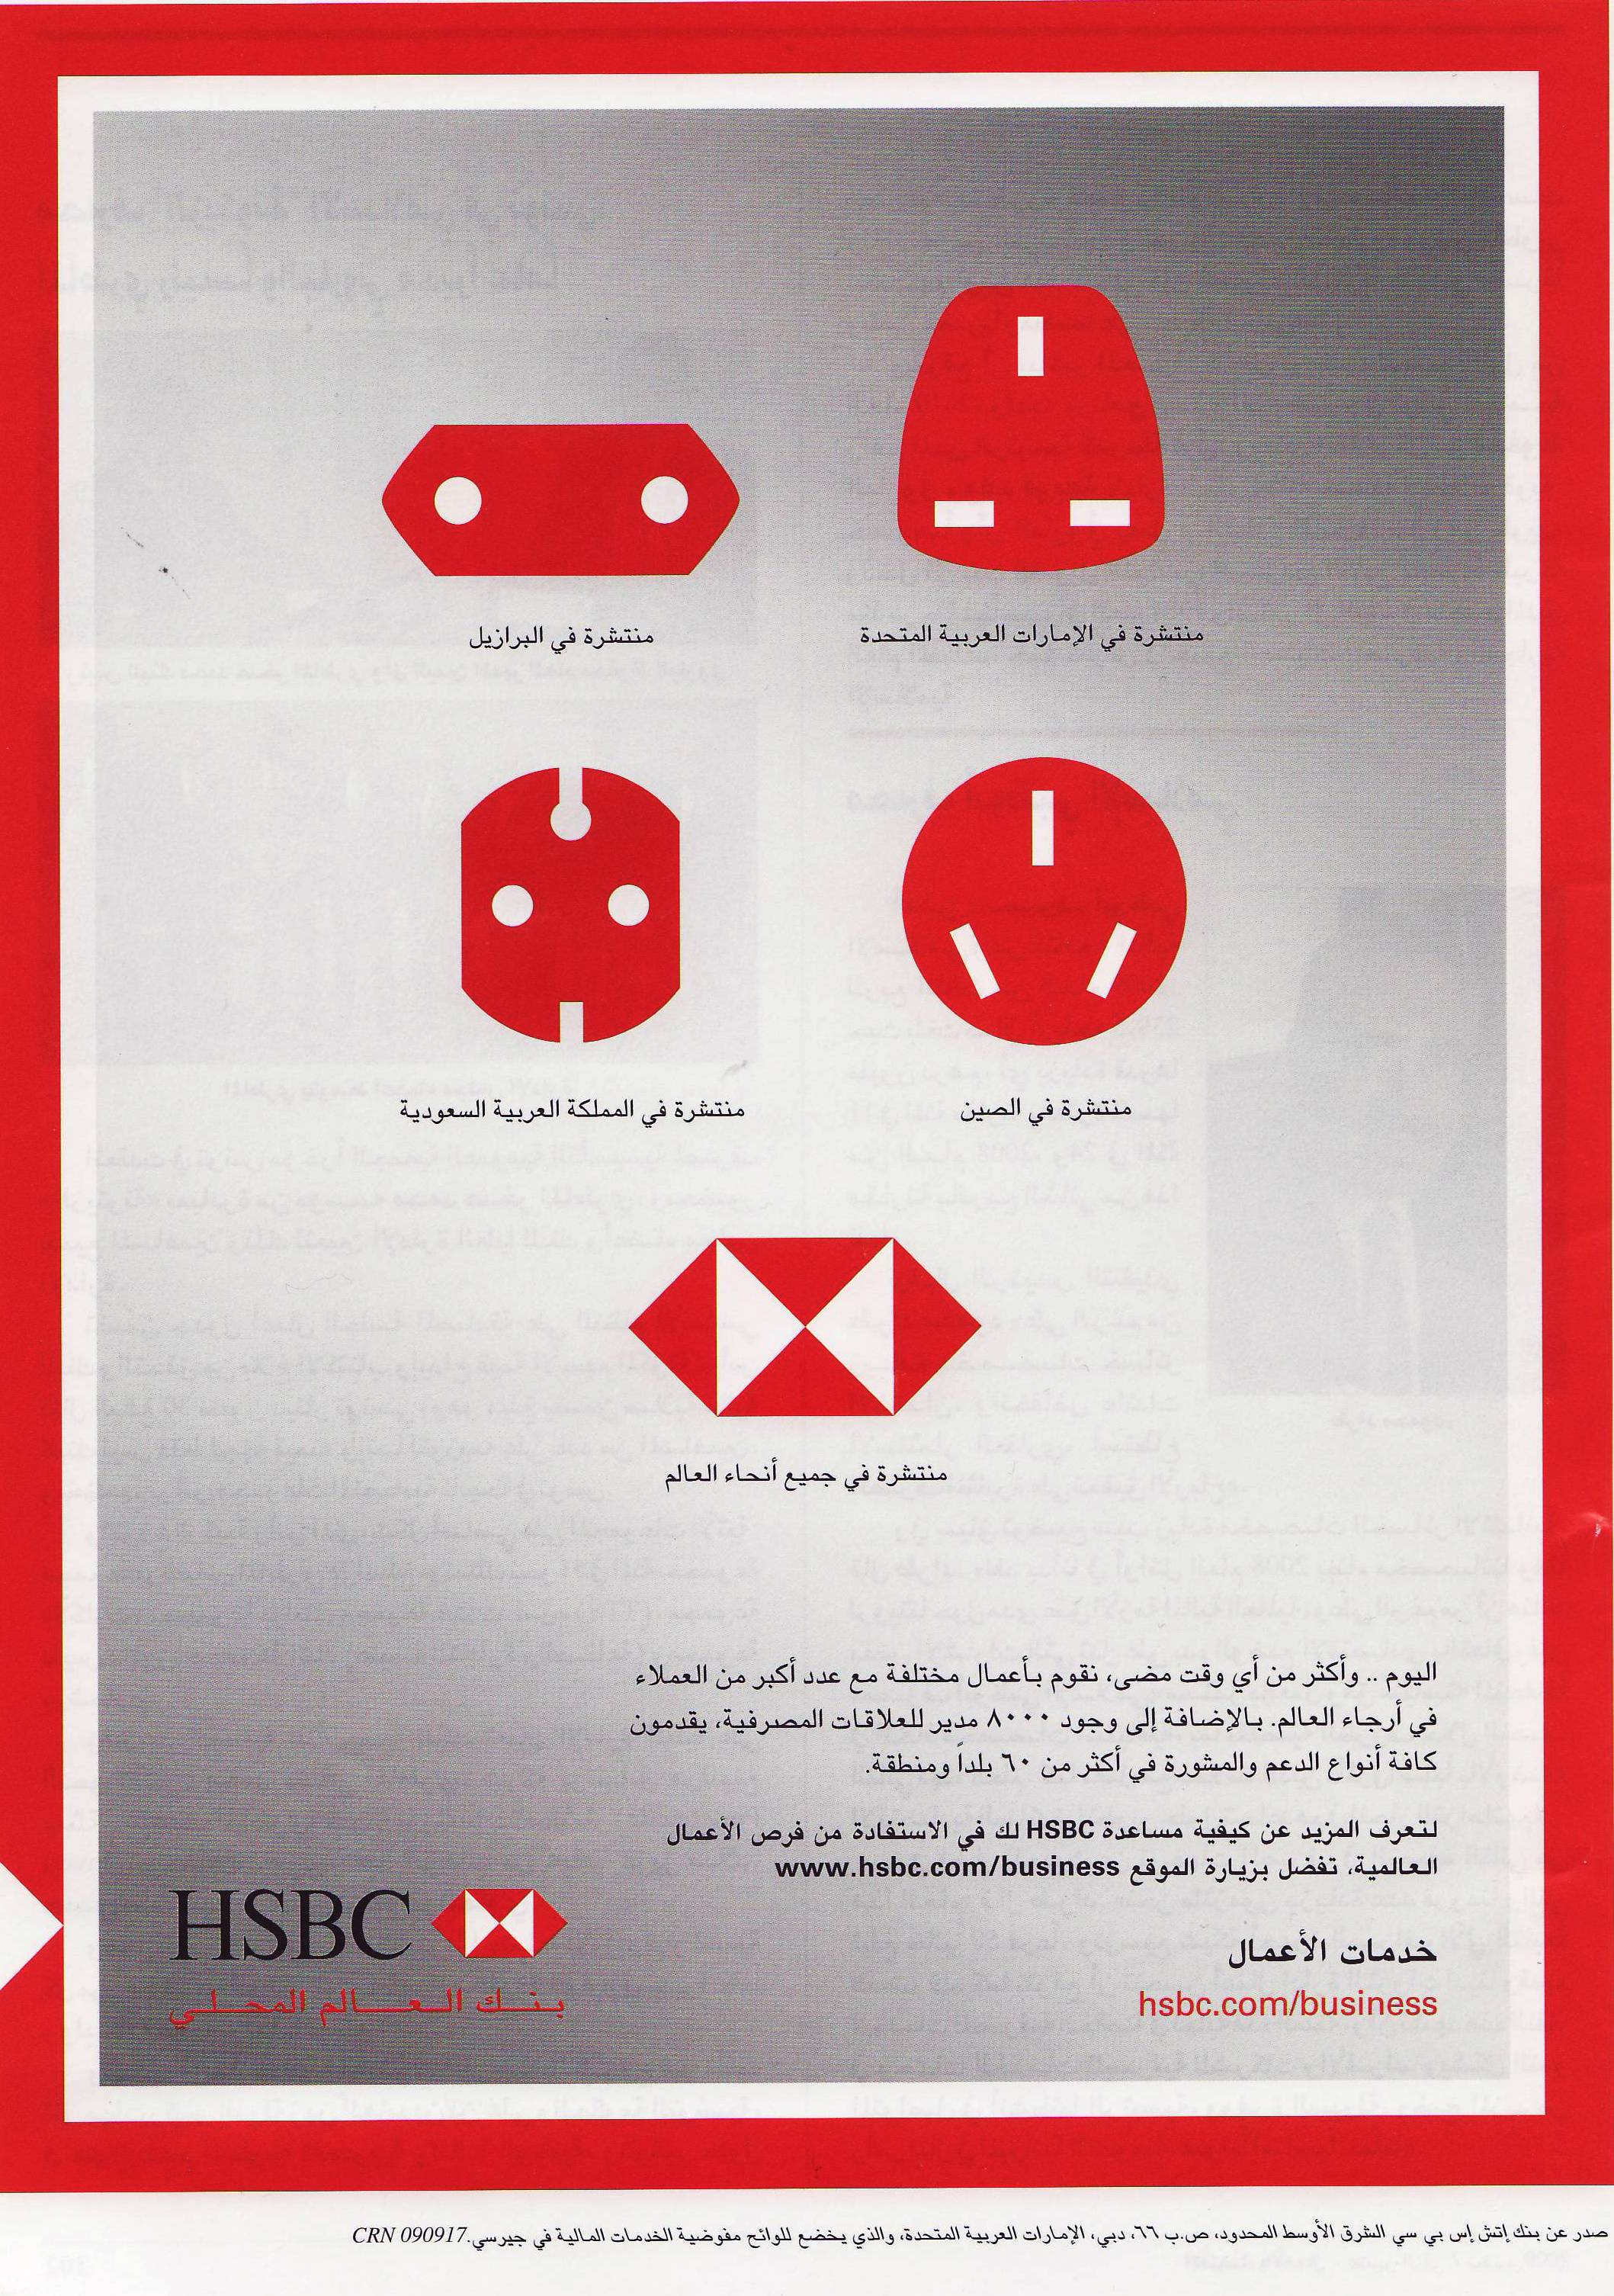 Hsbc Advertising Campaign